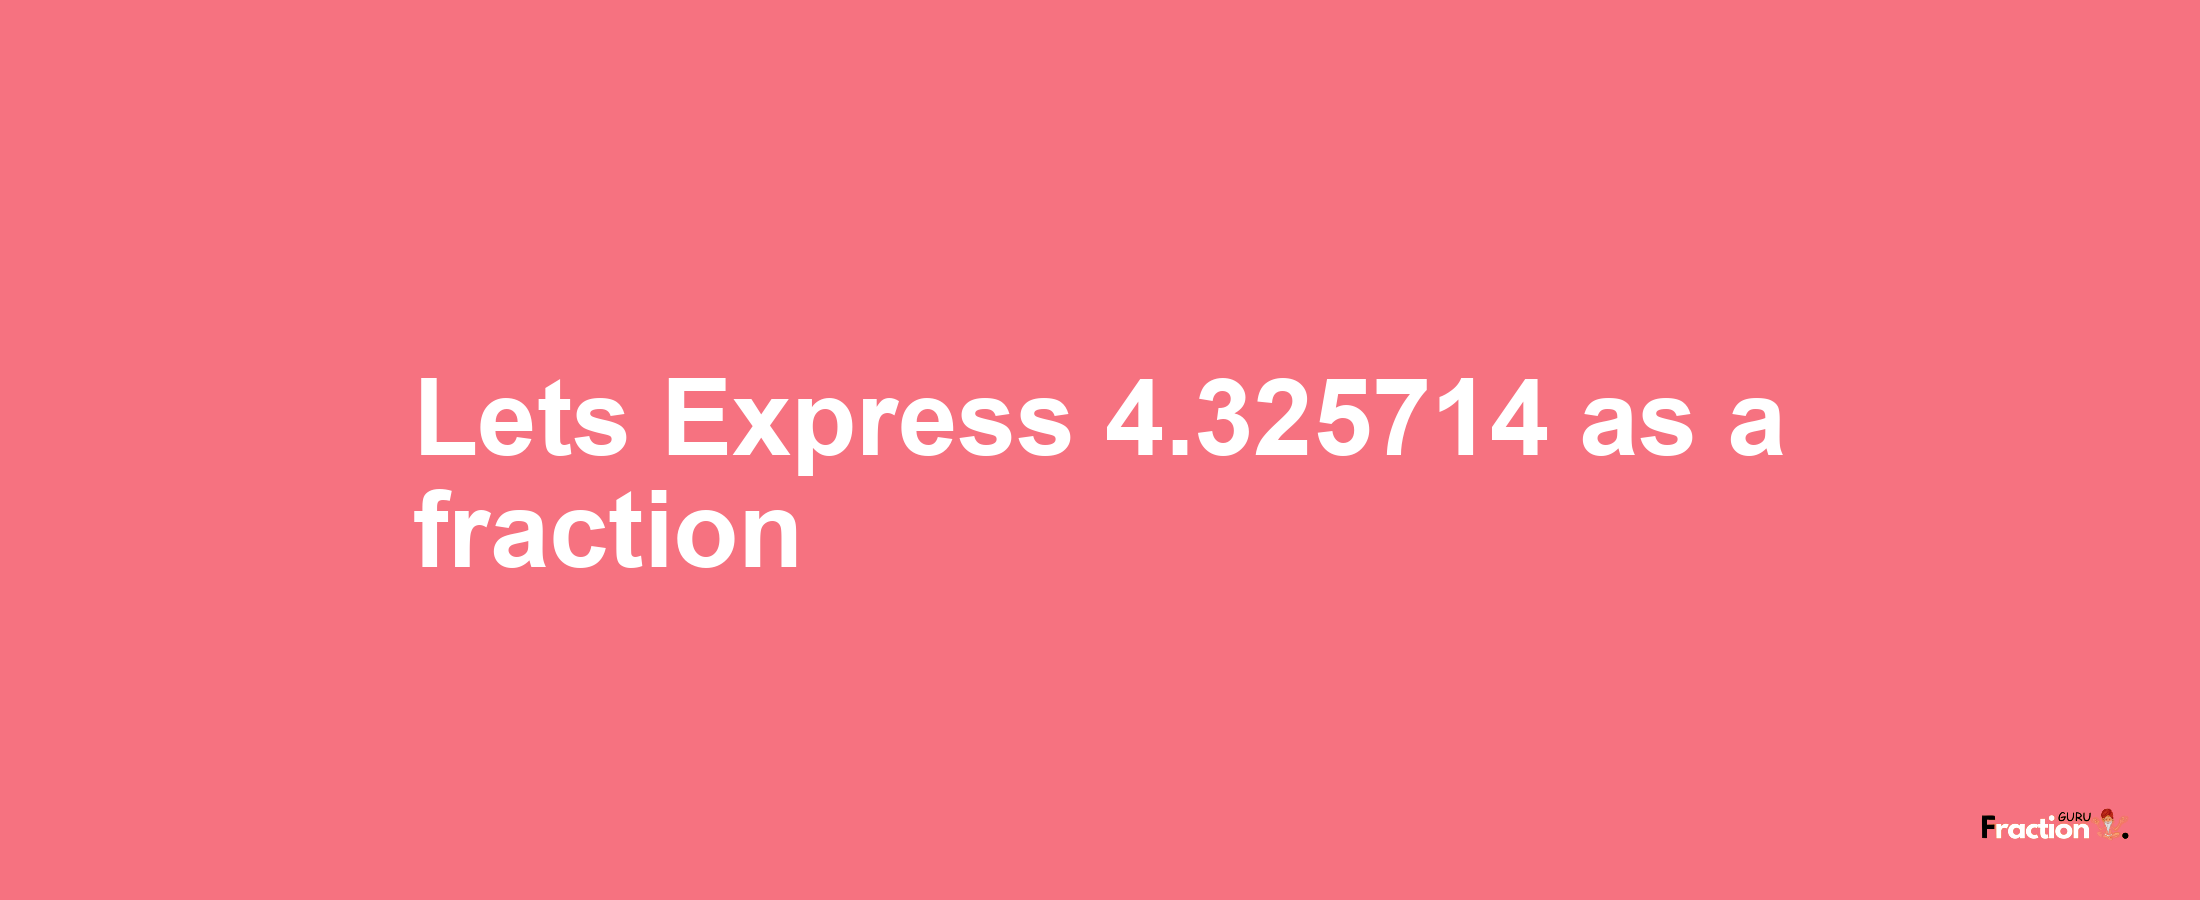 Lets Express 4.325714 as afraction